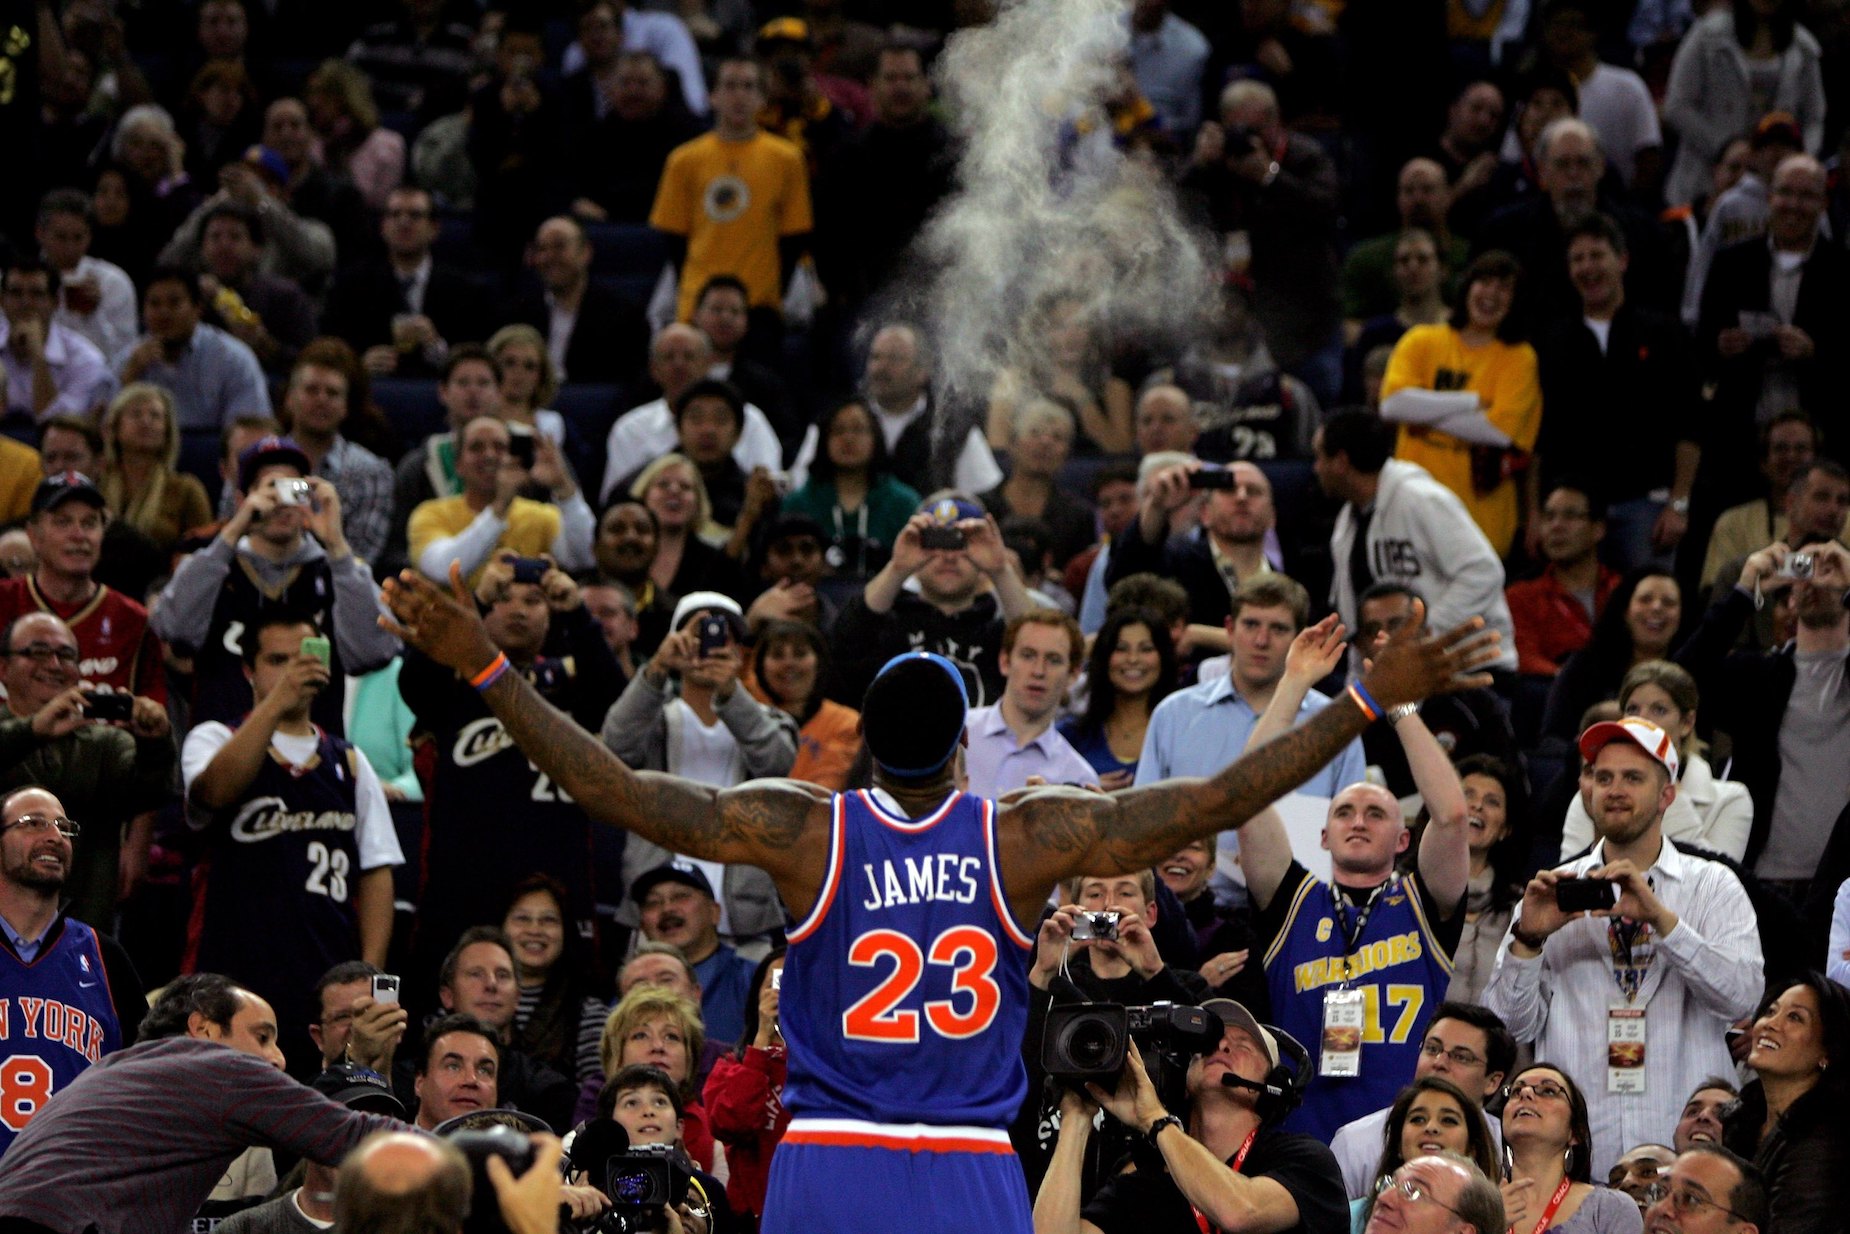 LeBron James was accused of being an "Illuminati wizard' by a conspiracy theorist.